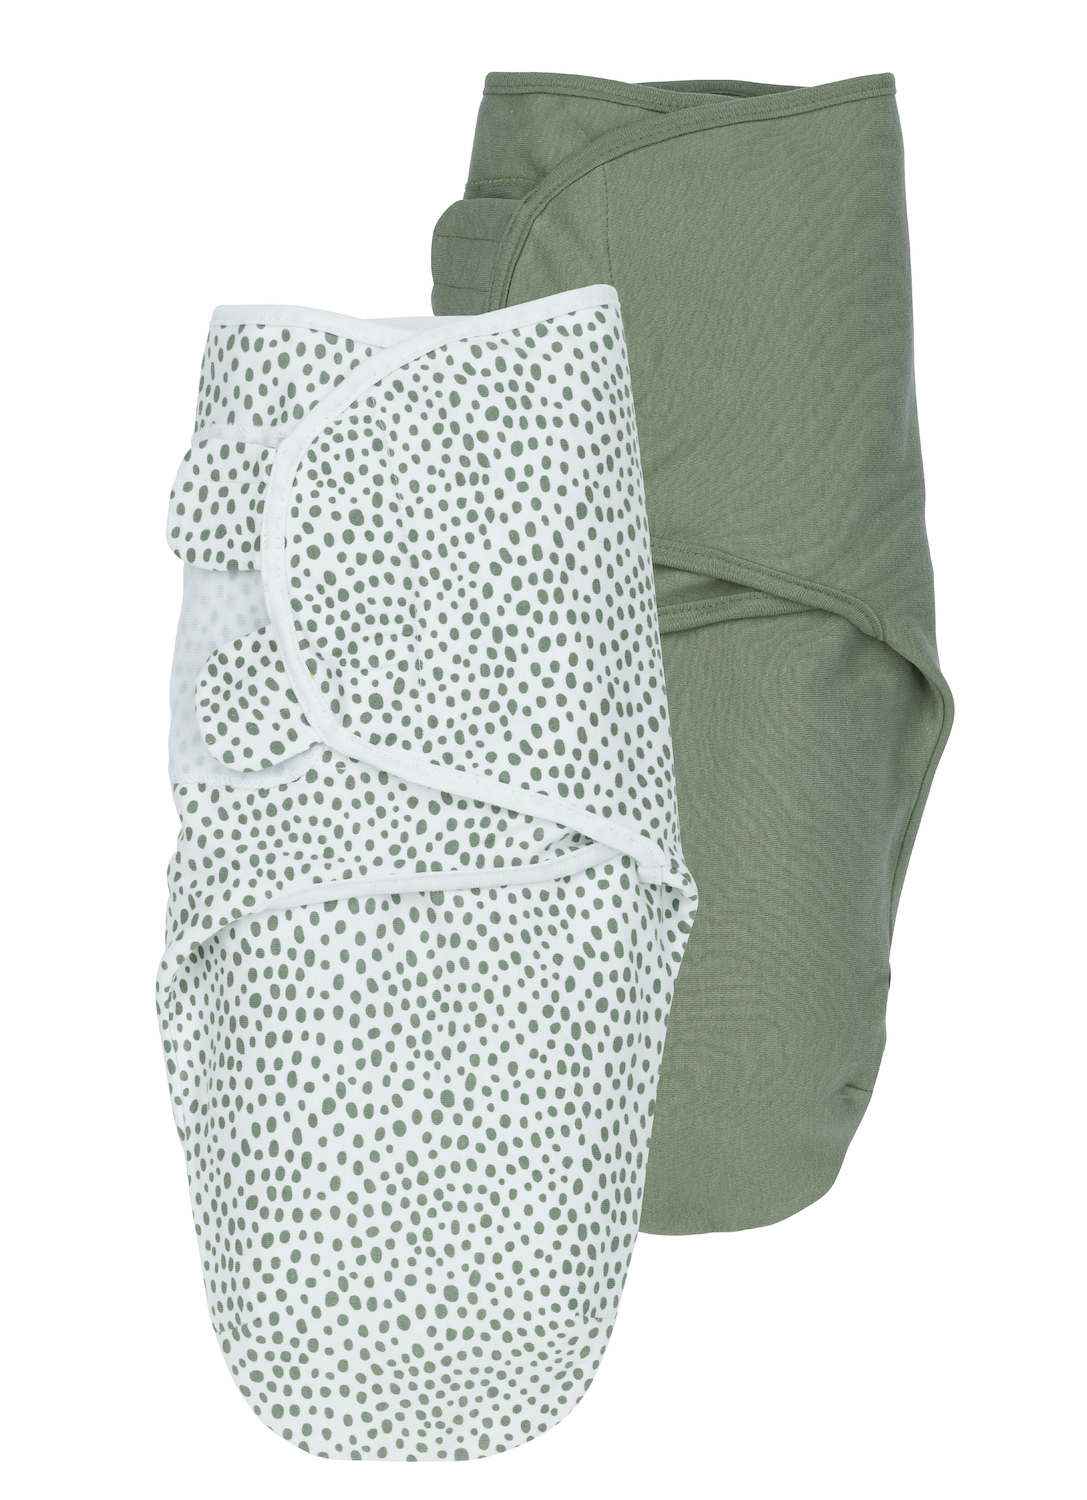 Swaddle 2-pack Cheetah/Uni - forest green - 4-6 Months